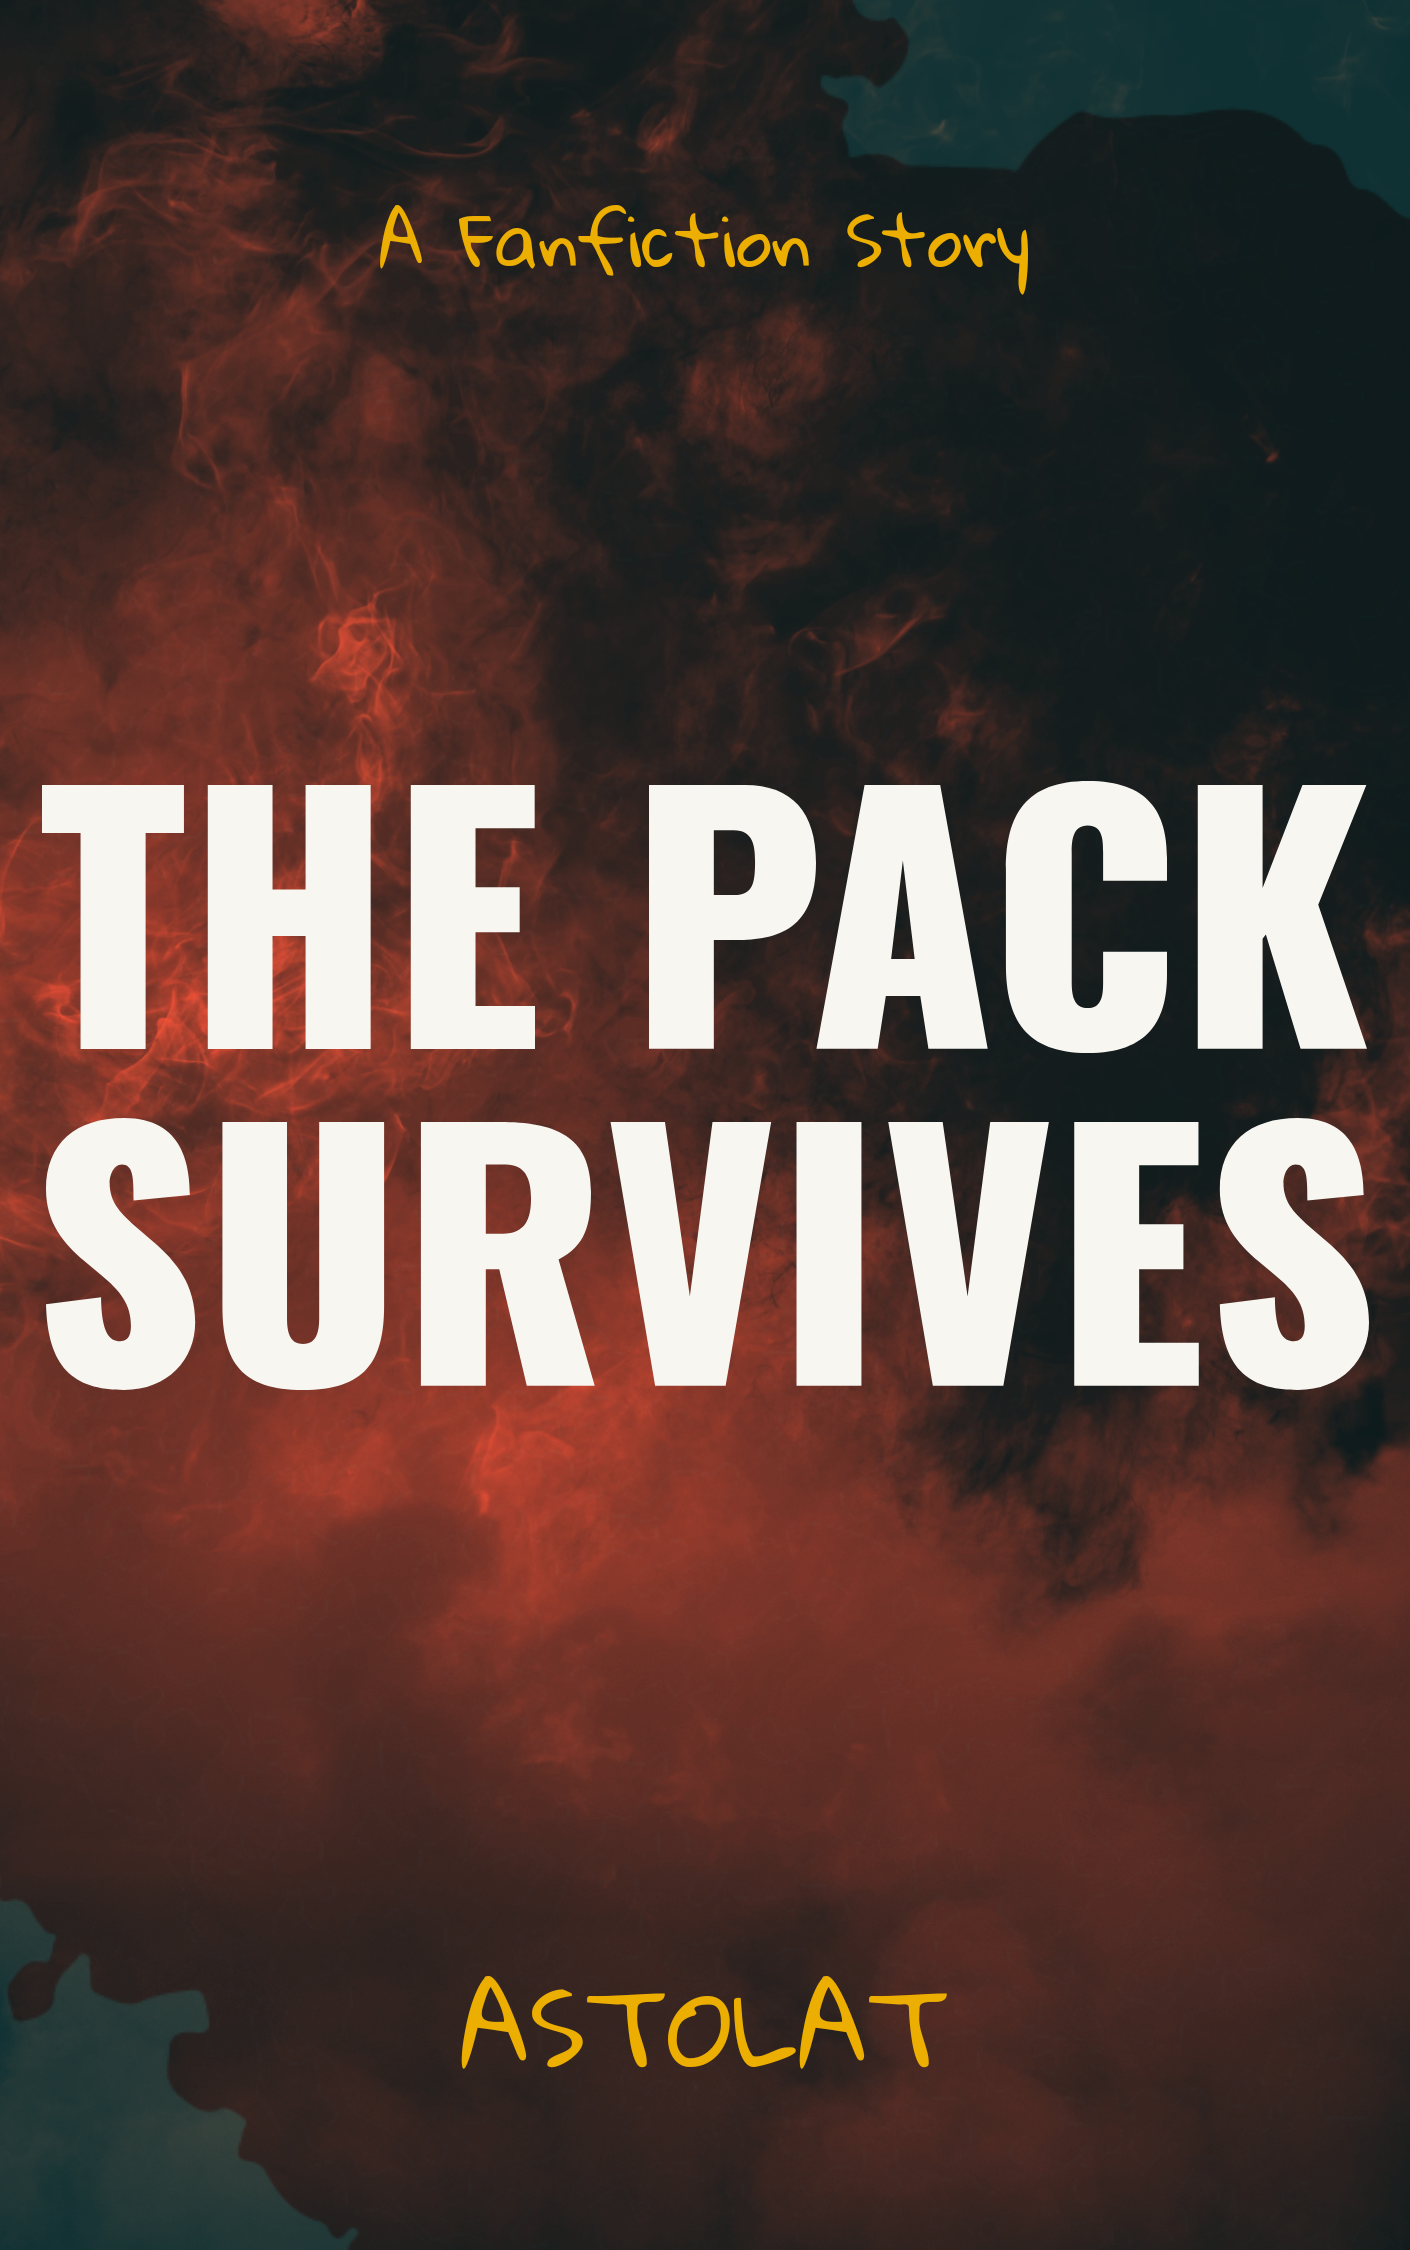 Fan cover of The Pack Survives by astolat. Background is a red and black cloud